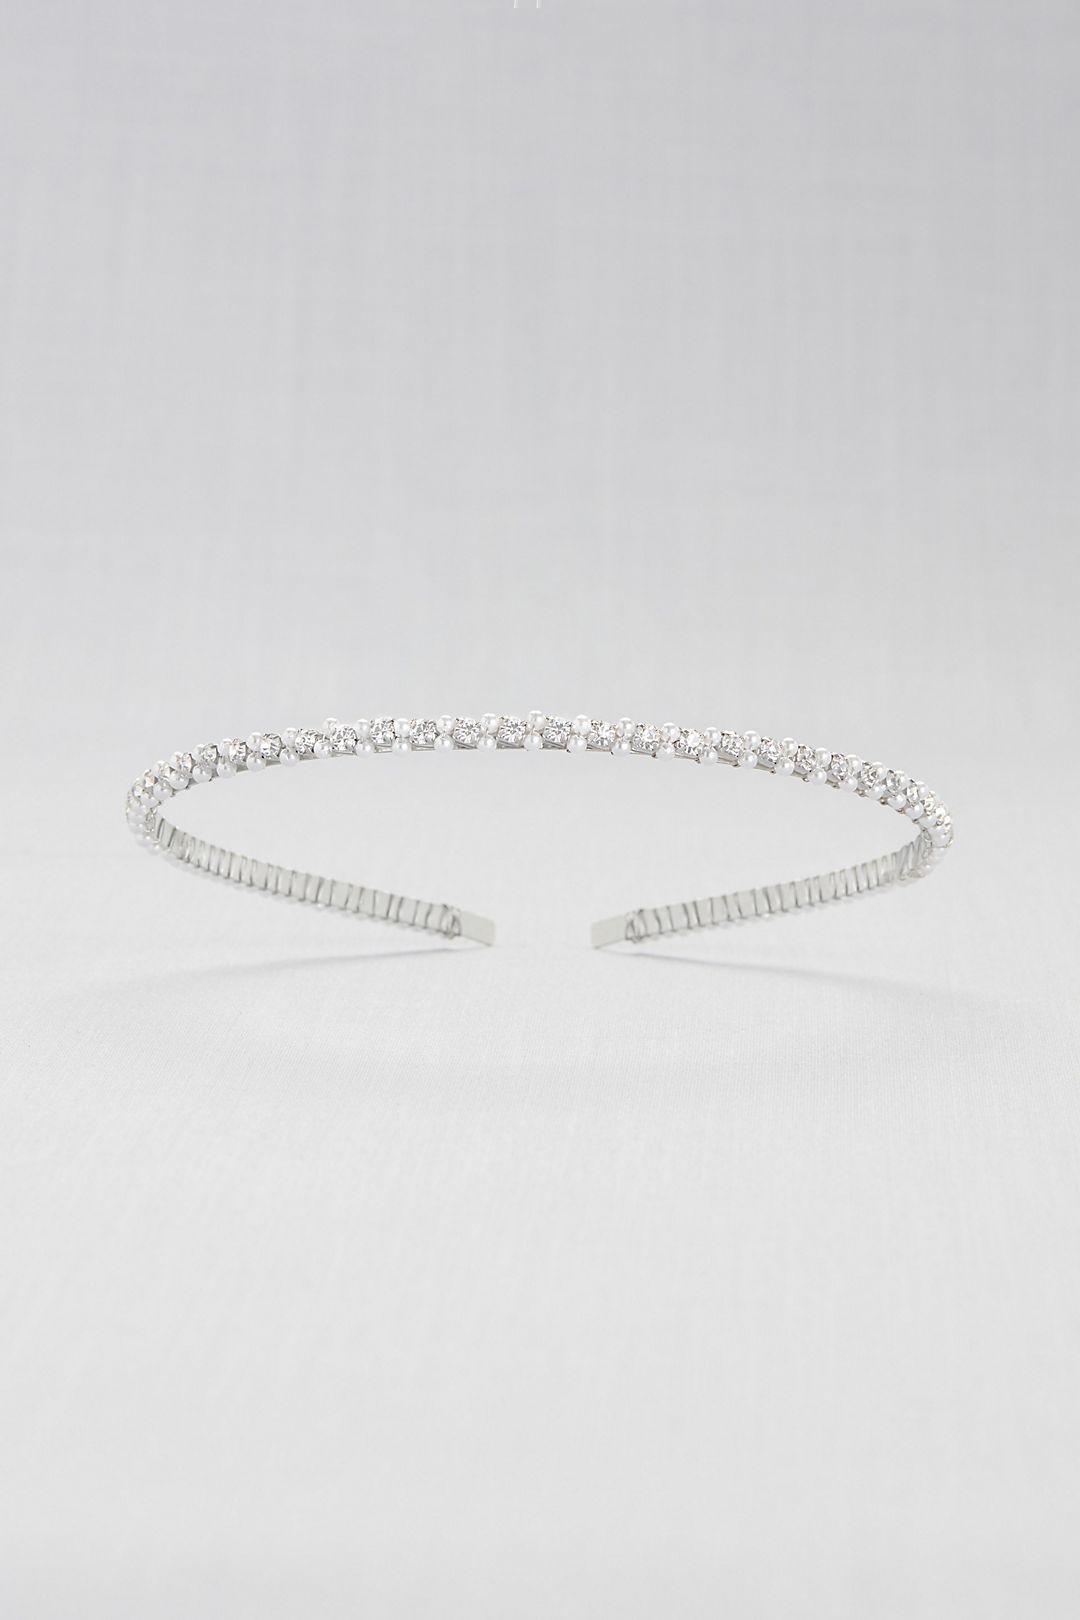 Double Pearl and Crystal Headband Image